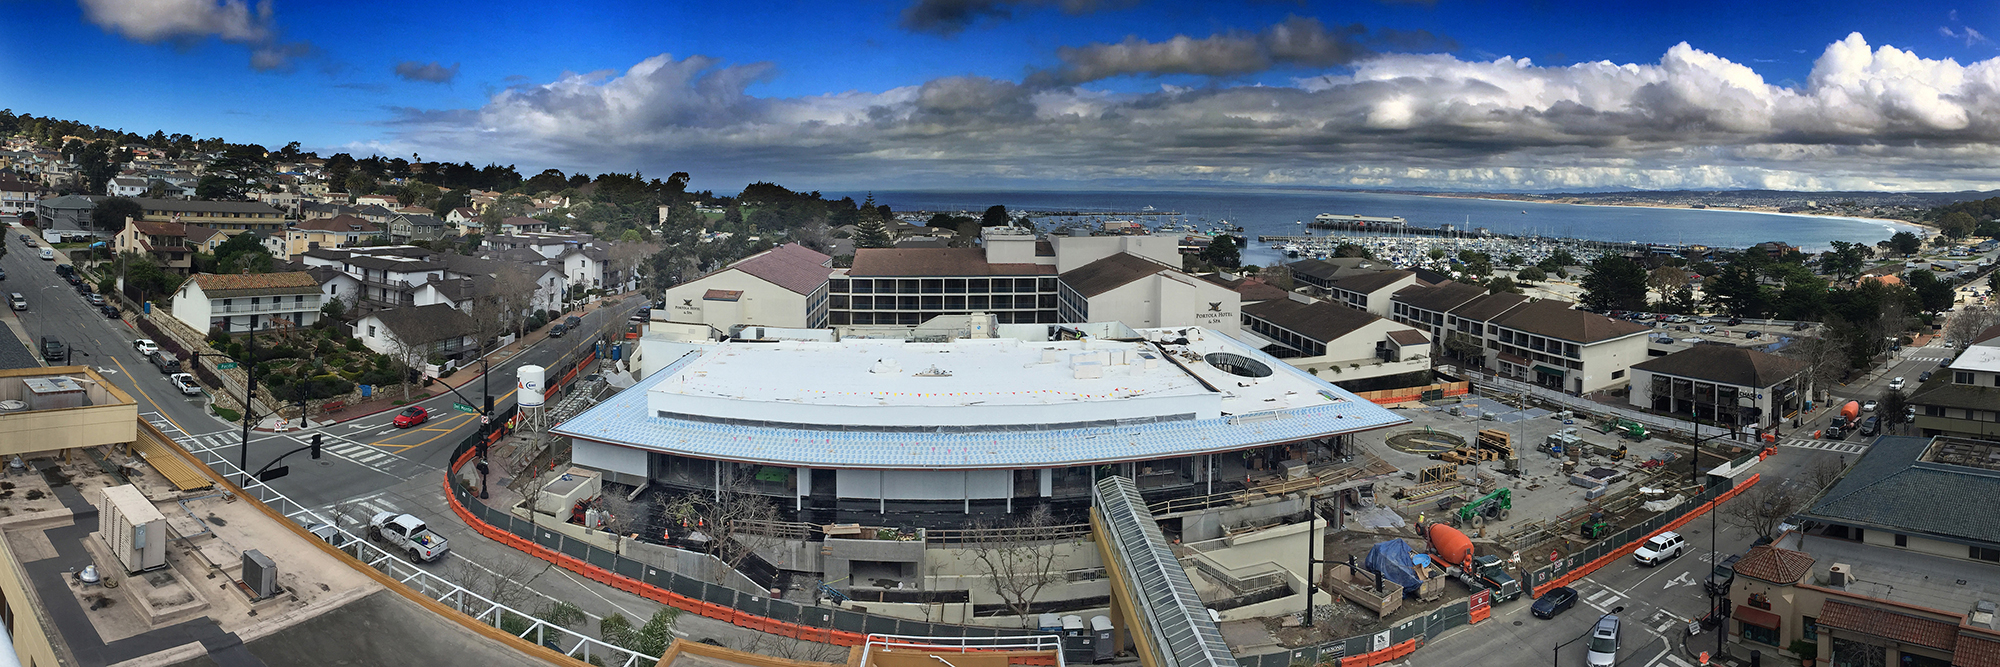 Monterey Bay March 2017 Looking down on the Monterey Conference Center and the Double Tree Hotel by Pat Hathaway ©2017 Accession # 2017-002-0003